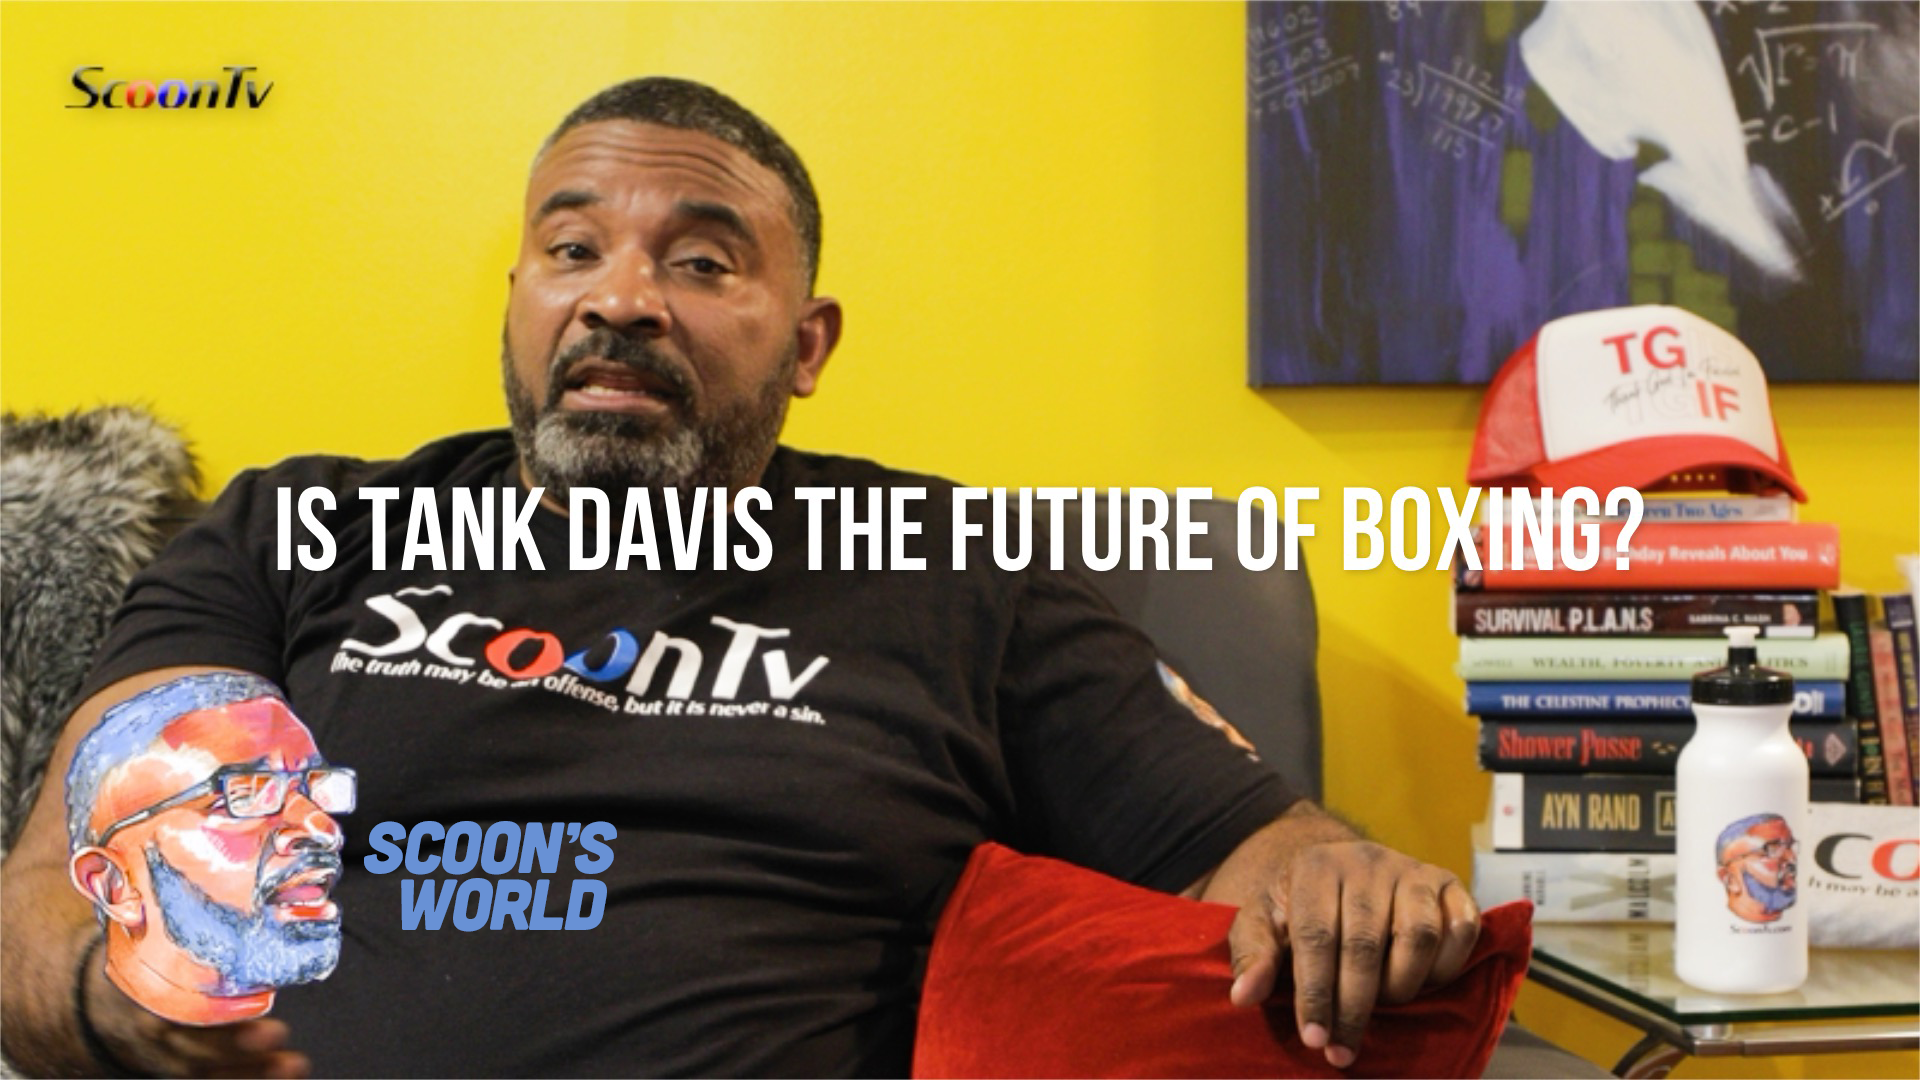 SCOON’S WORLD Is Tank Davis the Future of Boxing? ScoonTv